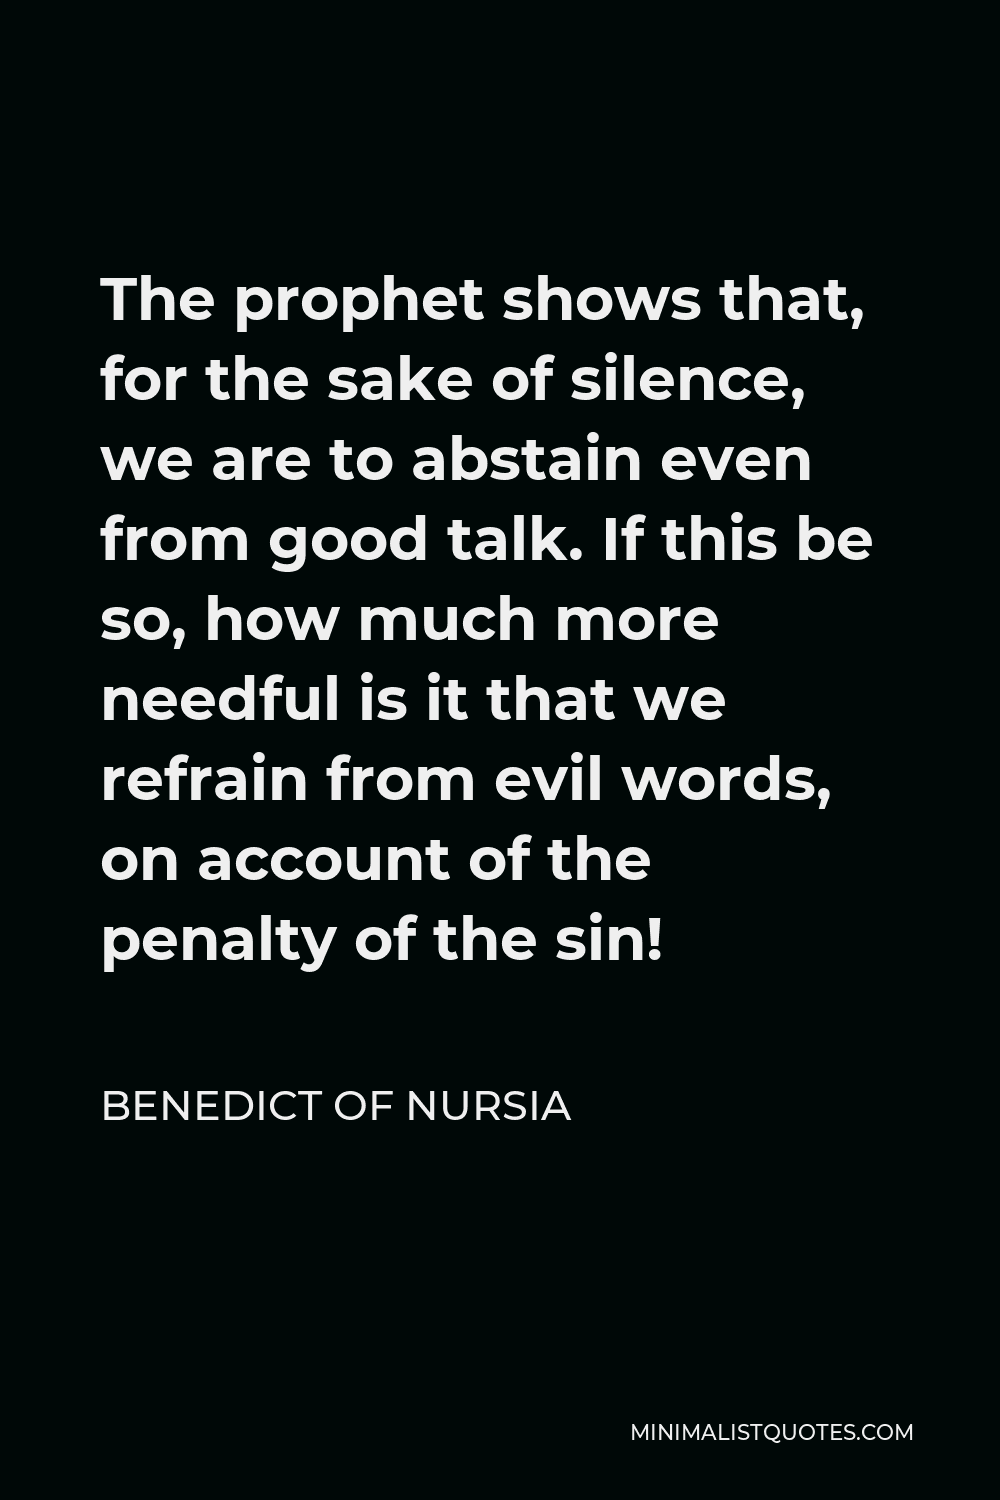 Benedict of Nursia Quote - The prophet shows that, for the sake of silence, we are to abstain even from good talk. If this be so, how much more needful is it that we refrain from evil words, on account of the penalty of the sin!